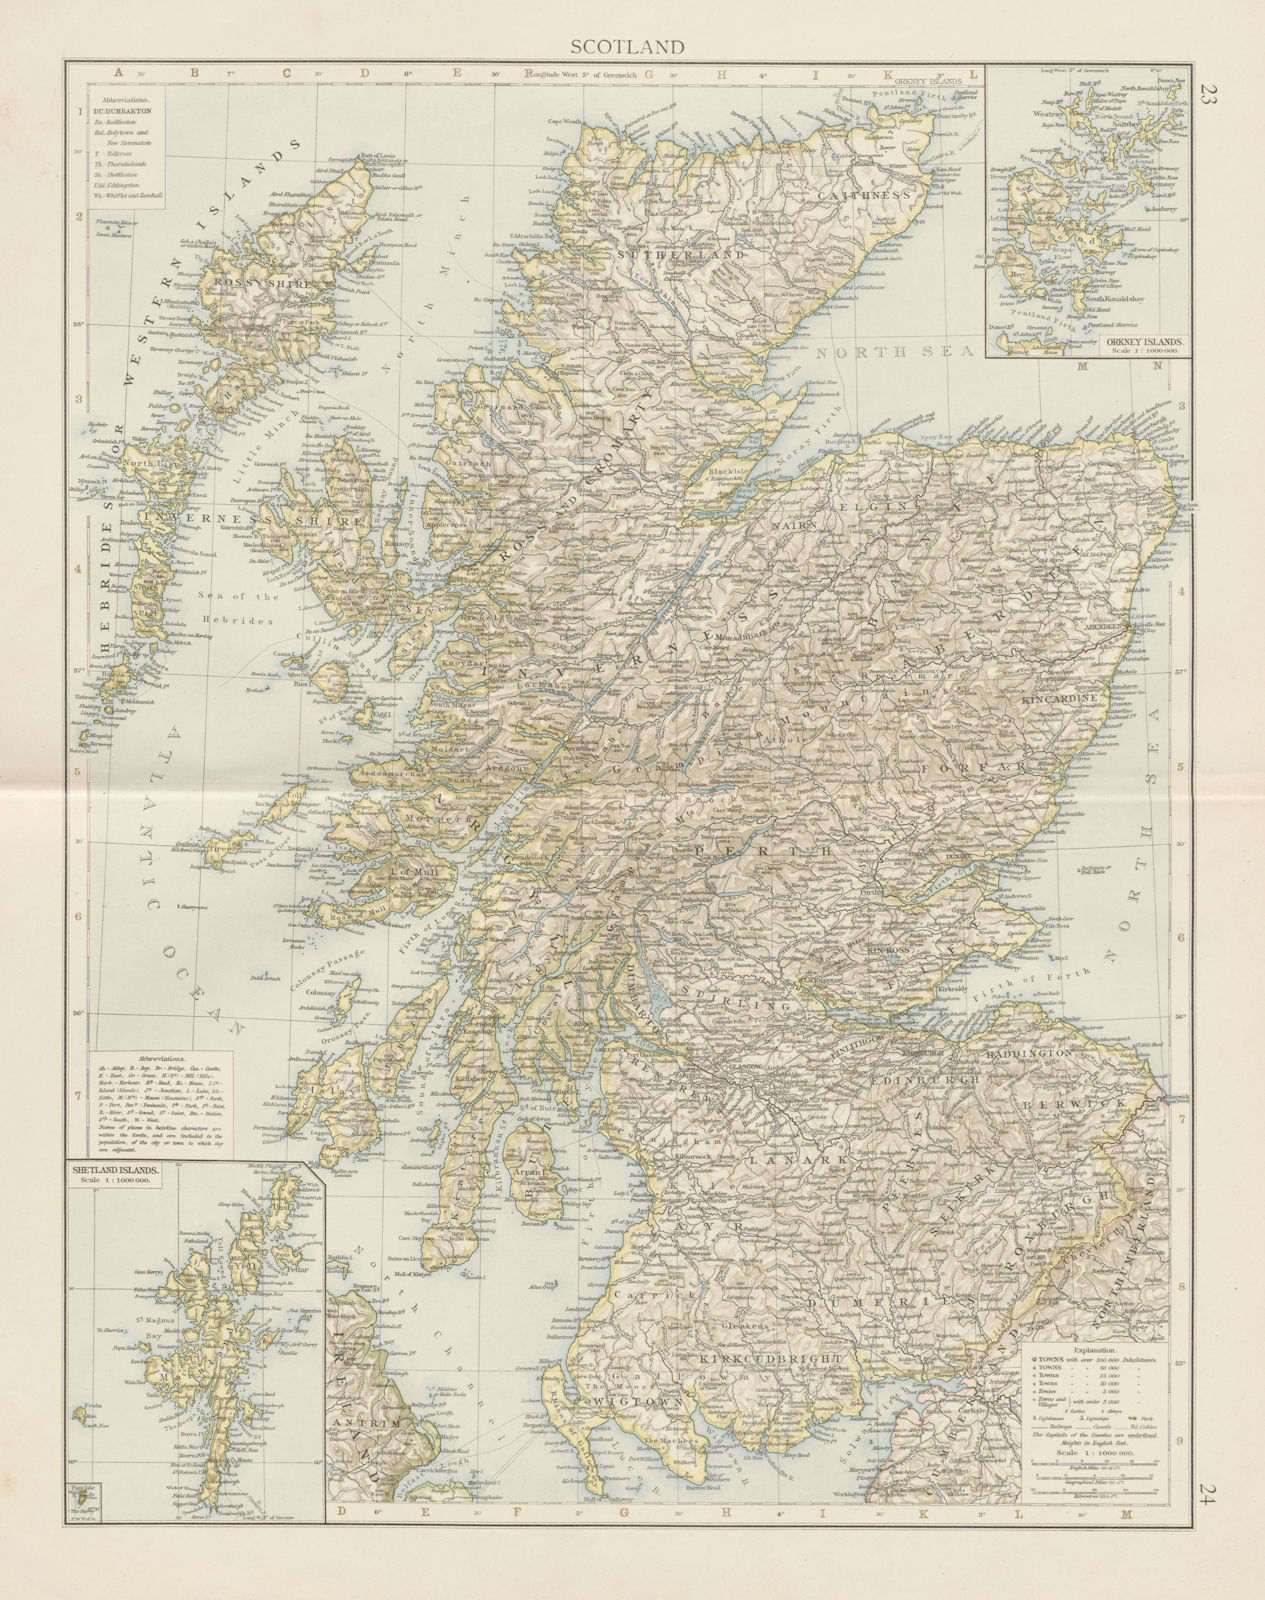 Associate Product Scotland. THE TIMES 1900 old antique vintage map plan chart